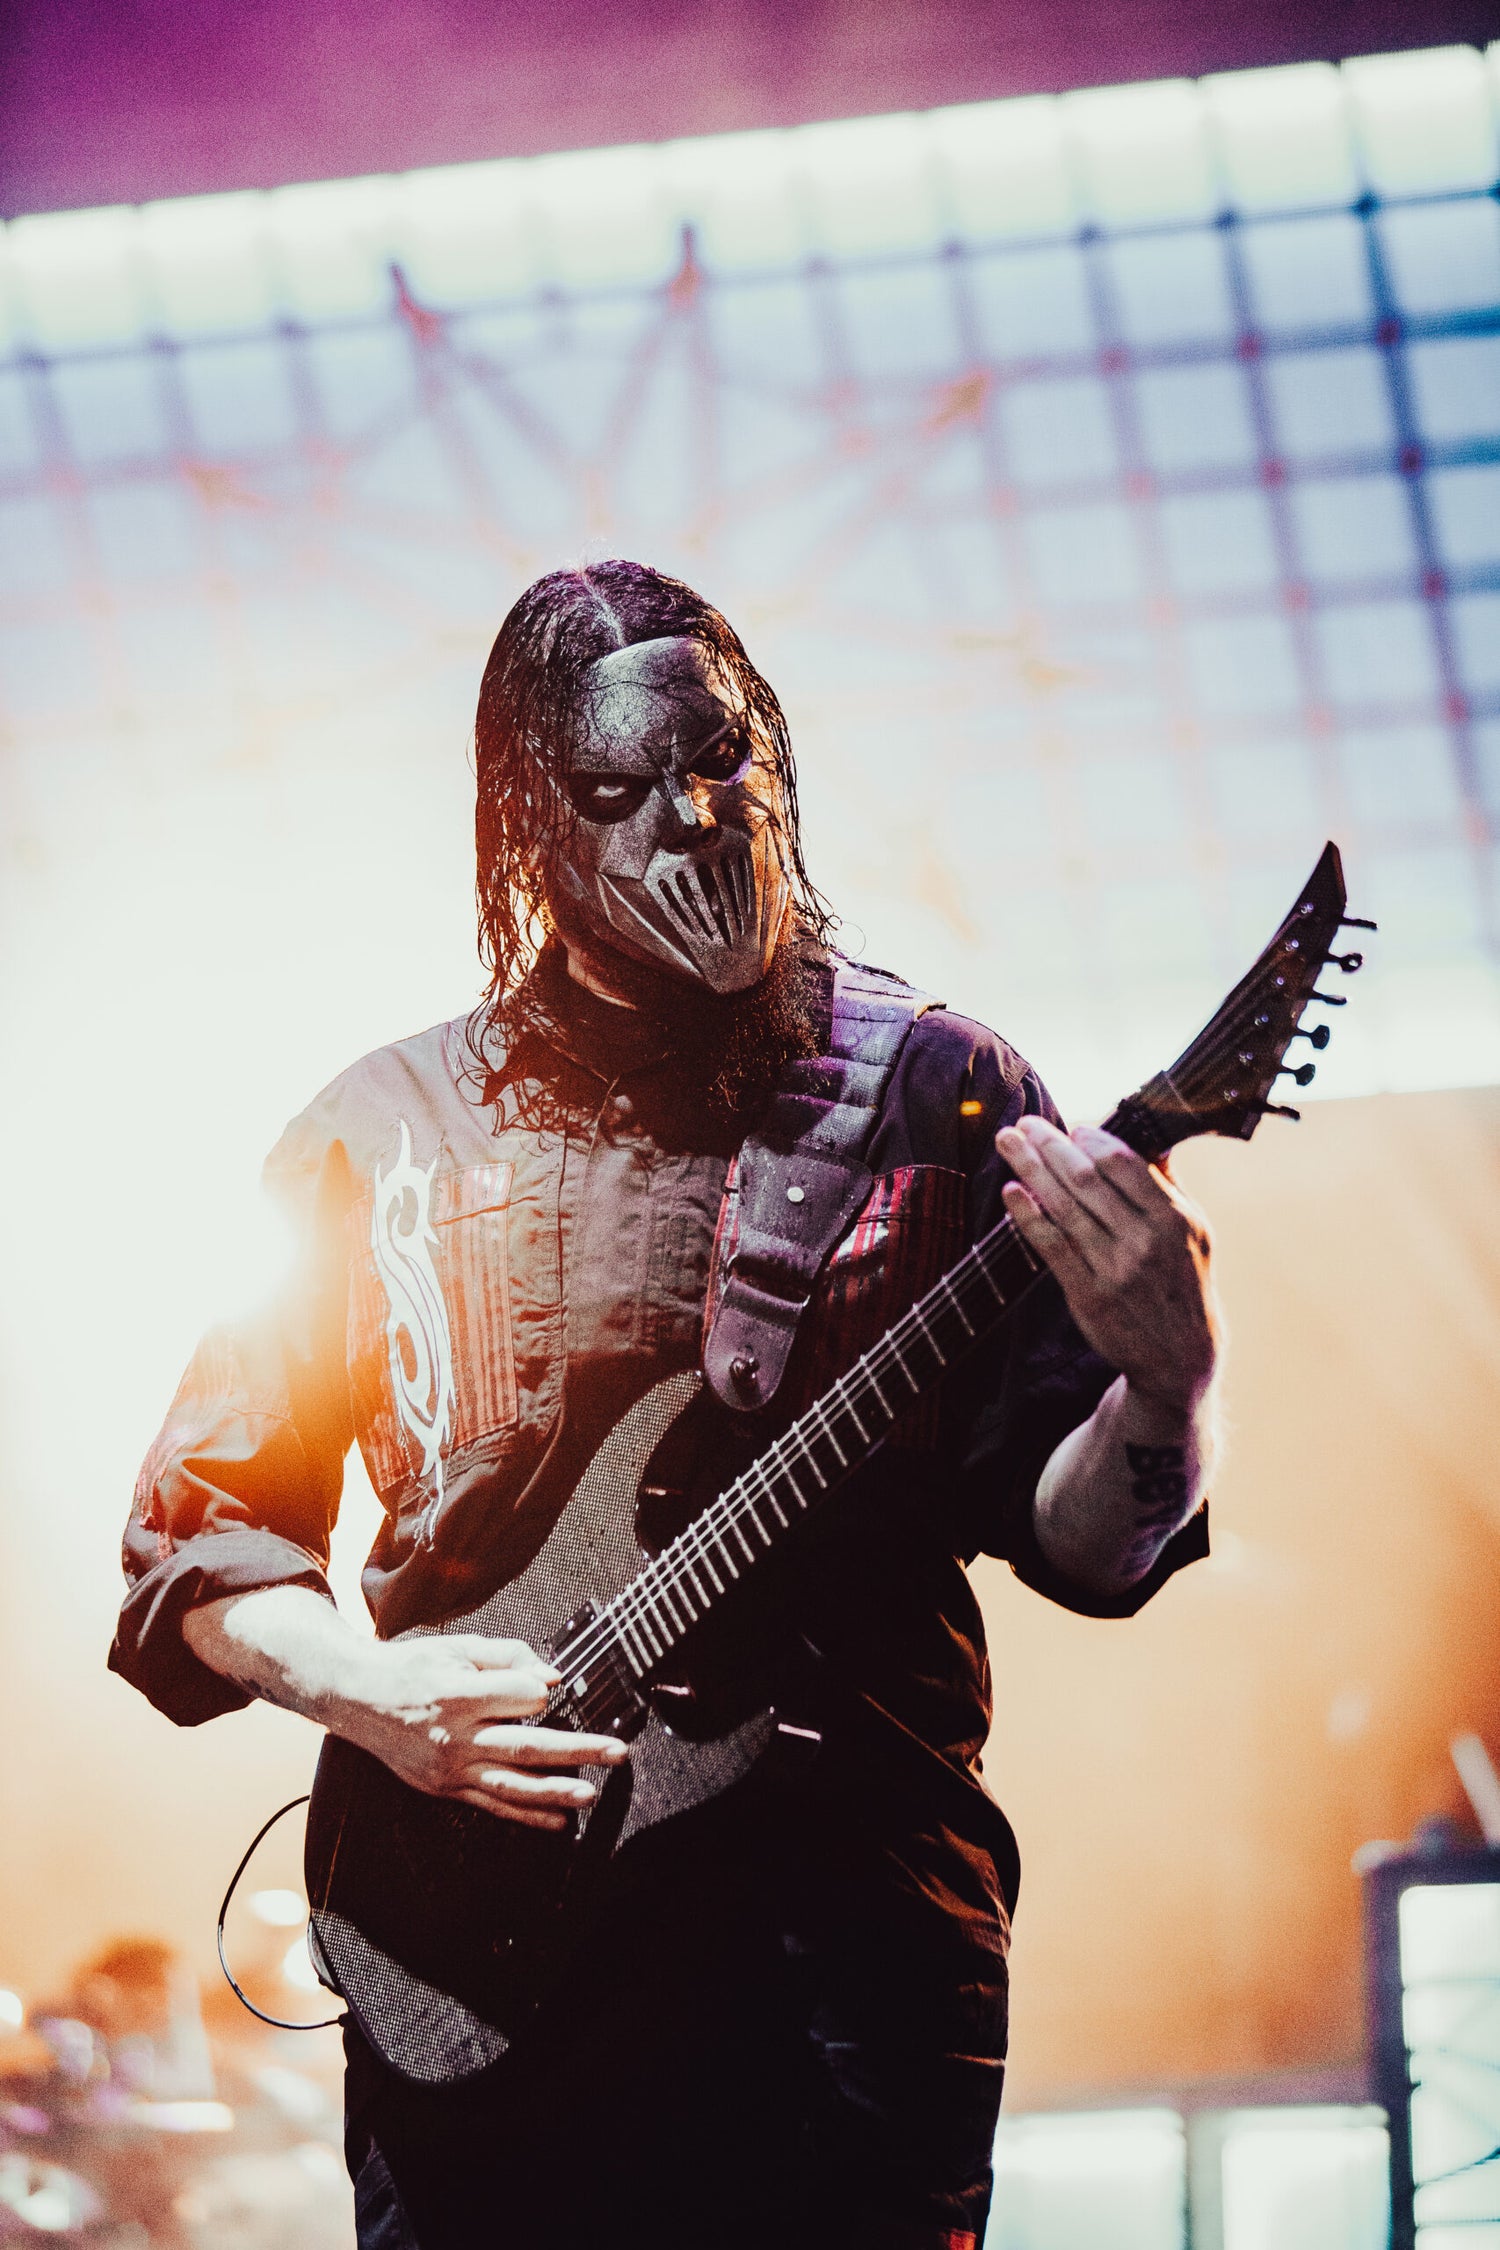 Slipknot deliver a commanding performance at Inkcarceration Festival